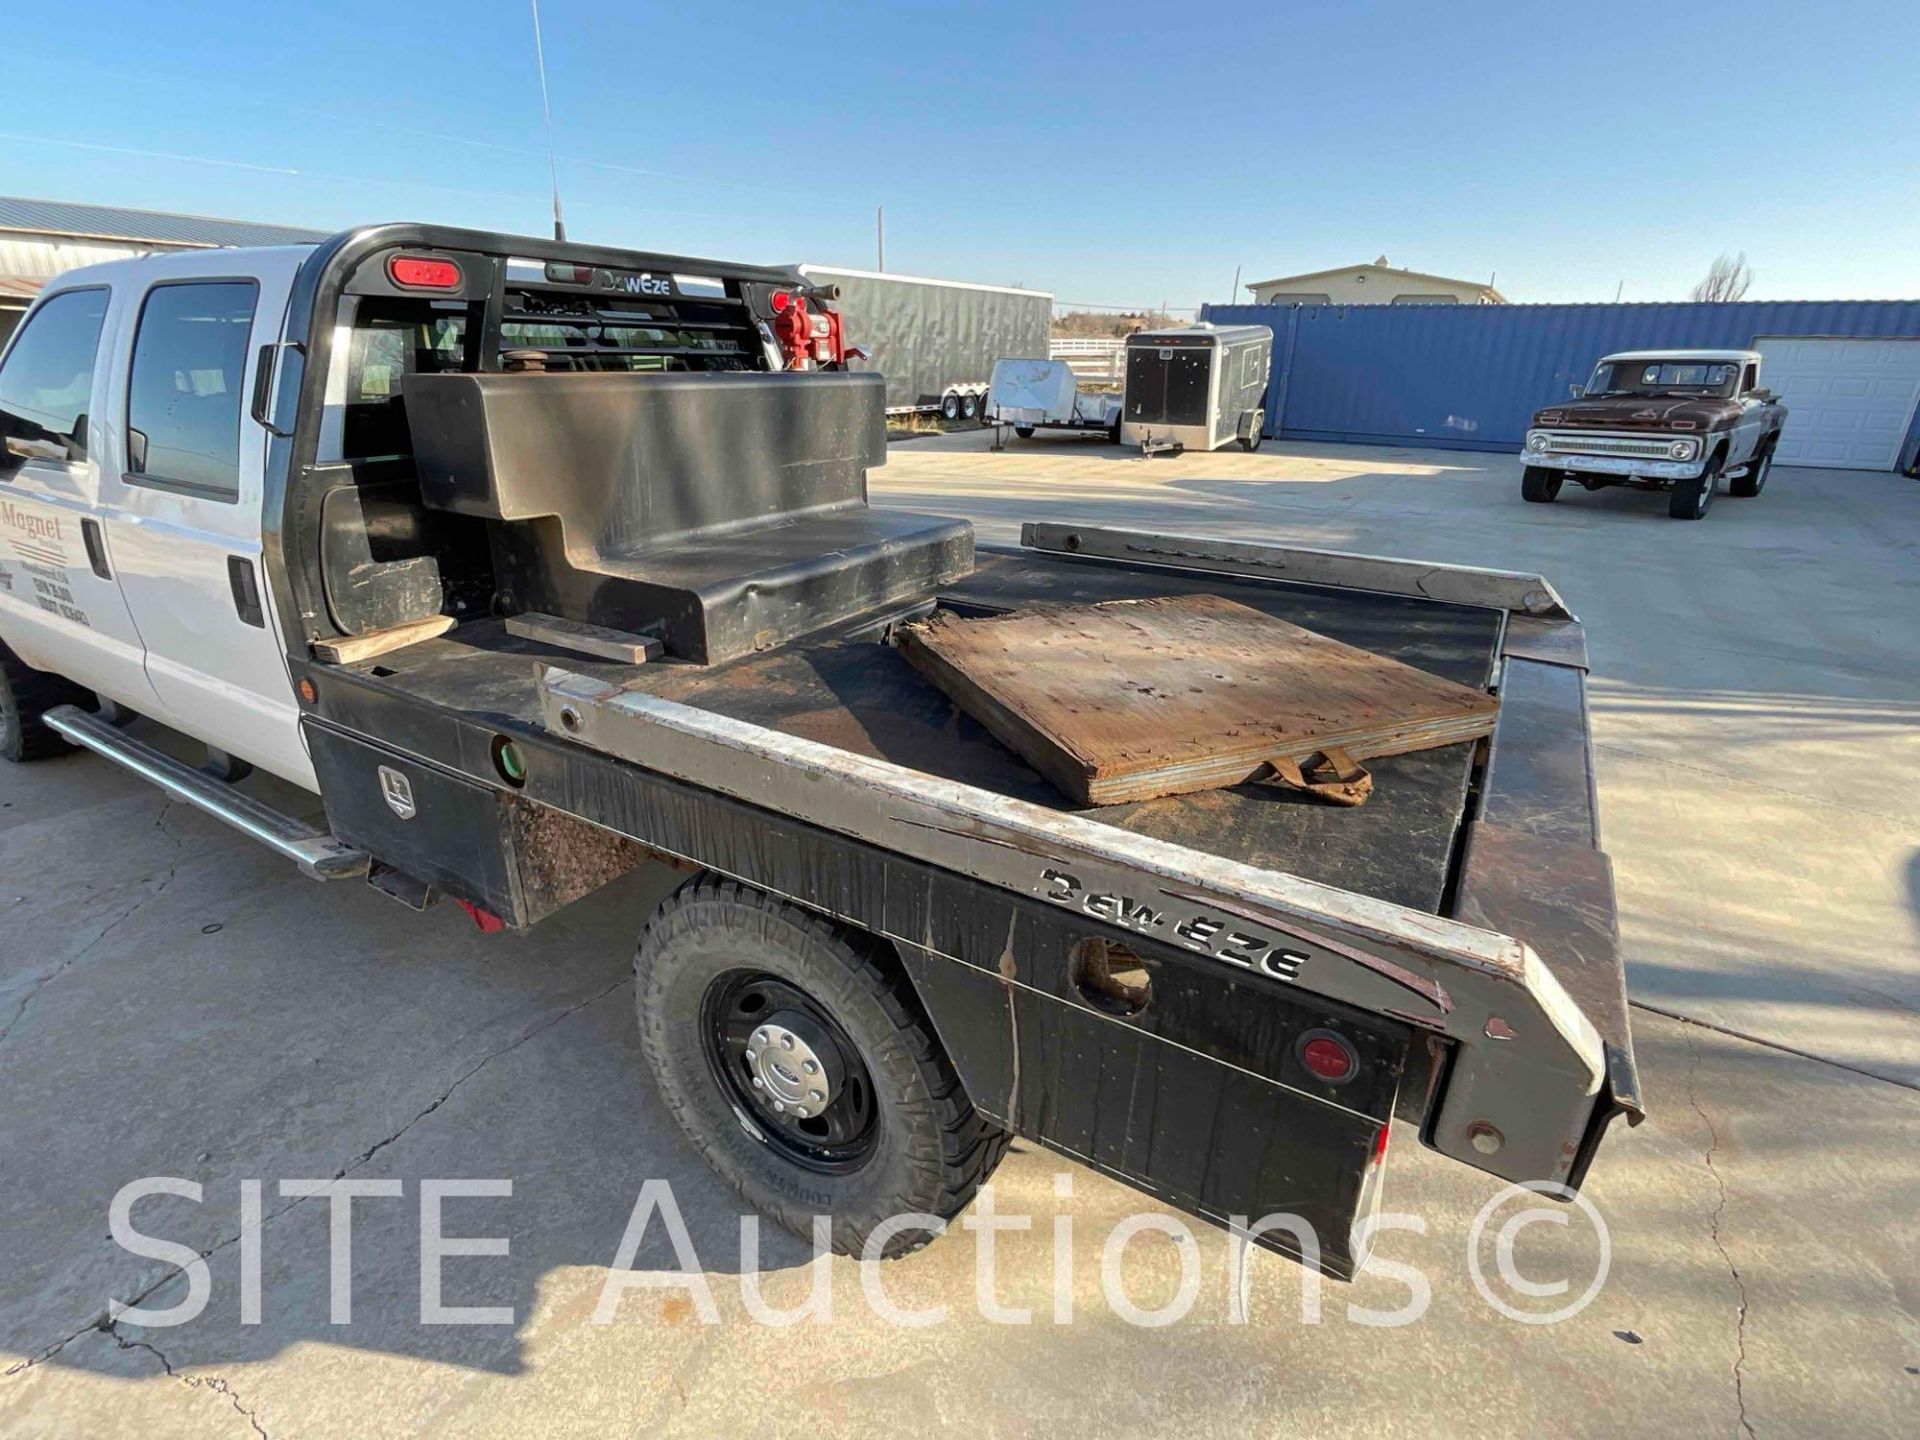 2011 Ford F250 SD Crew Cab Flatbed Truck - Image 20 of 31